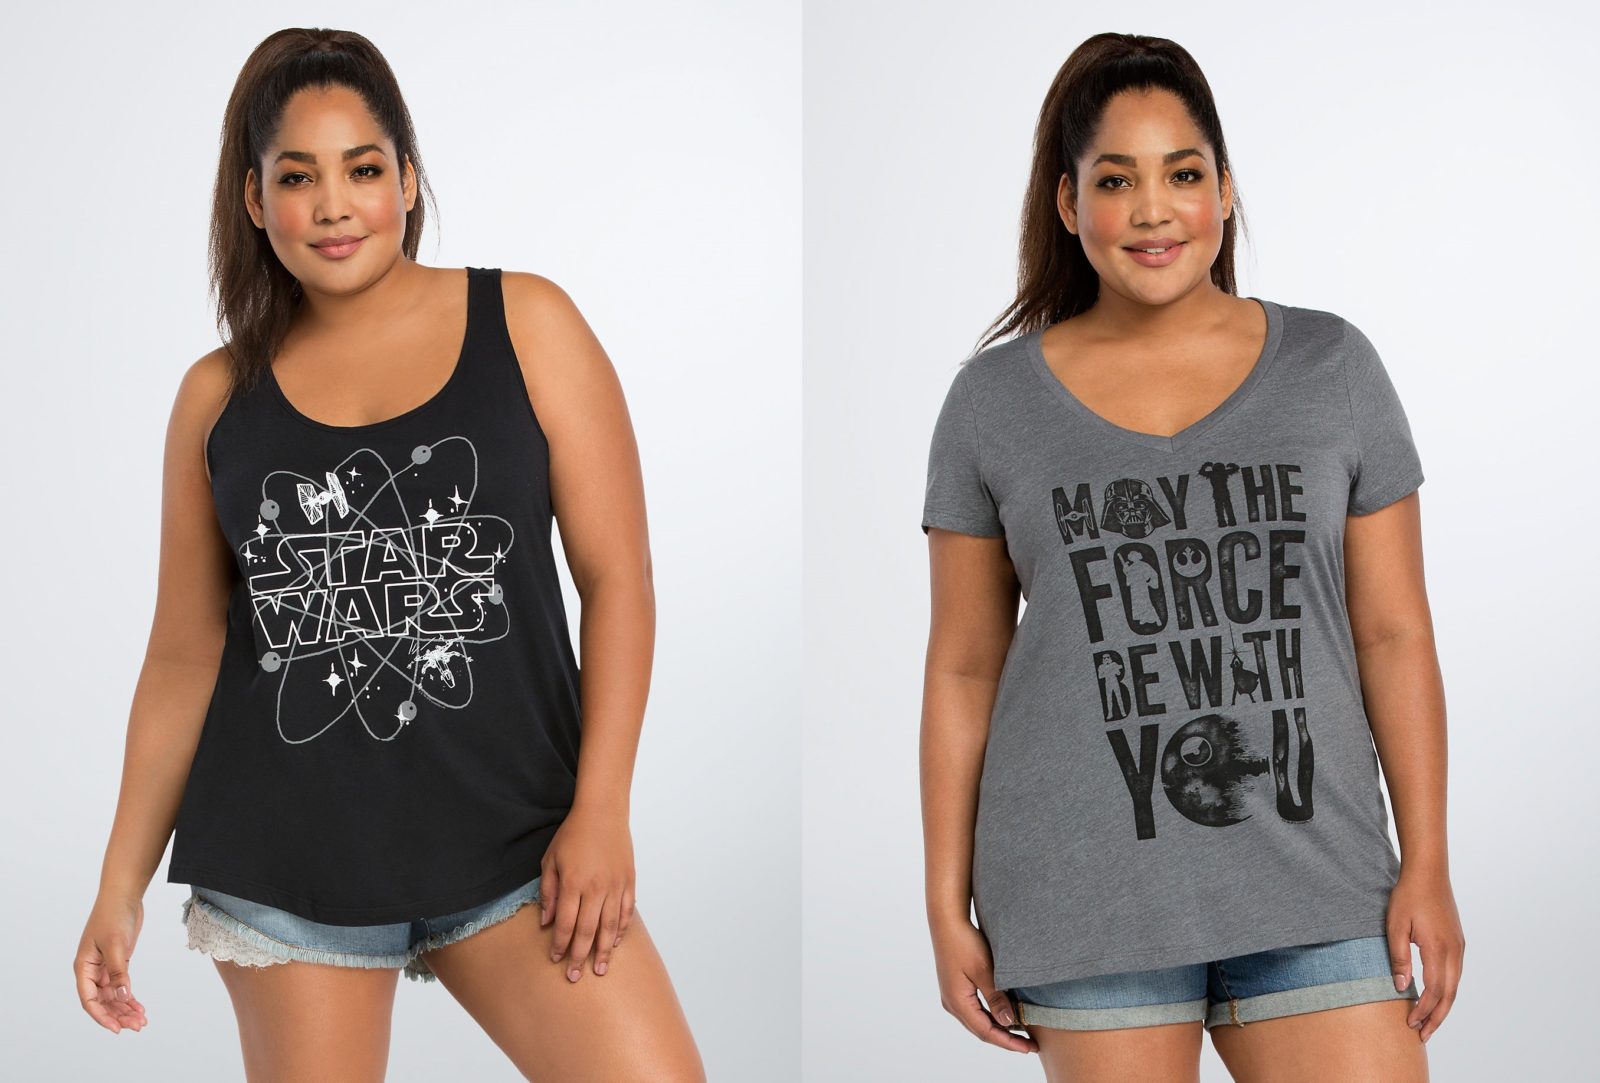 Two new tops at Torrid